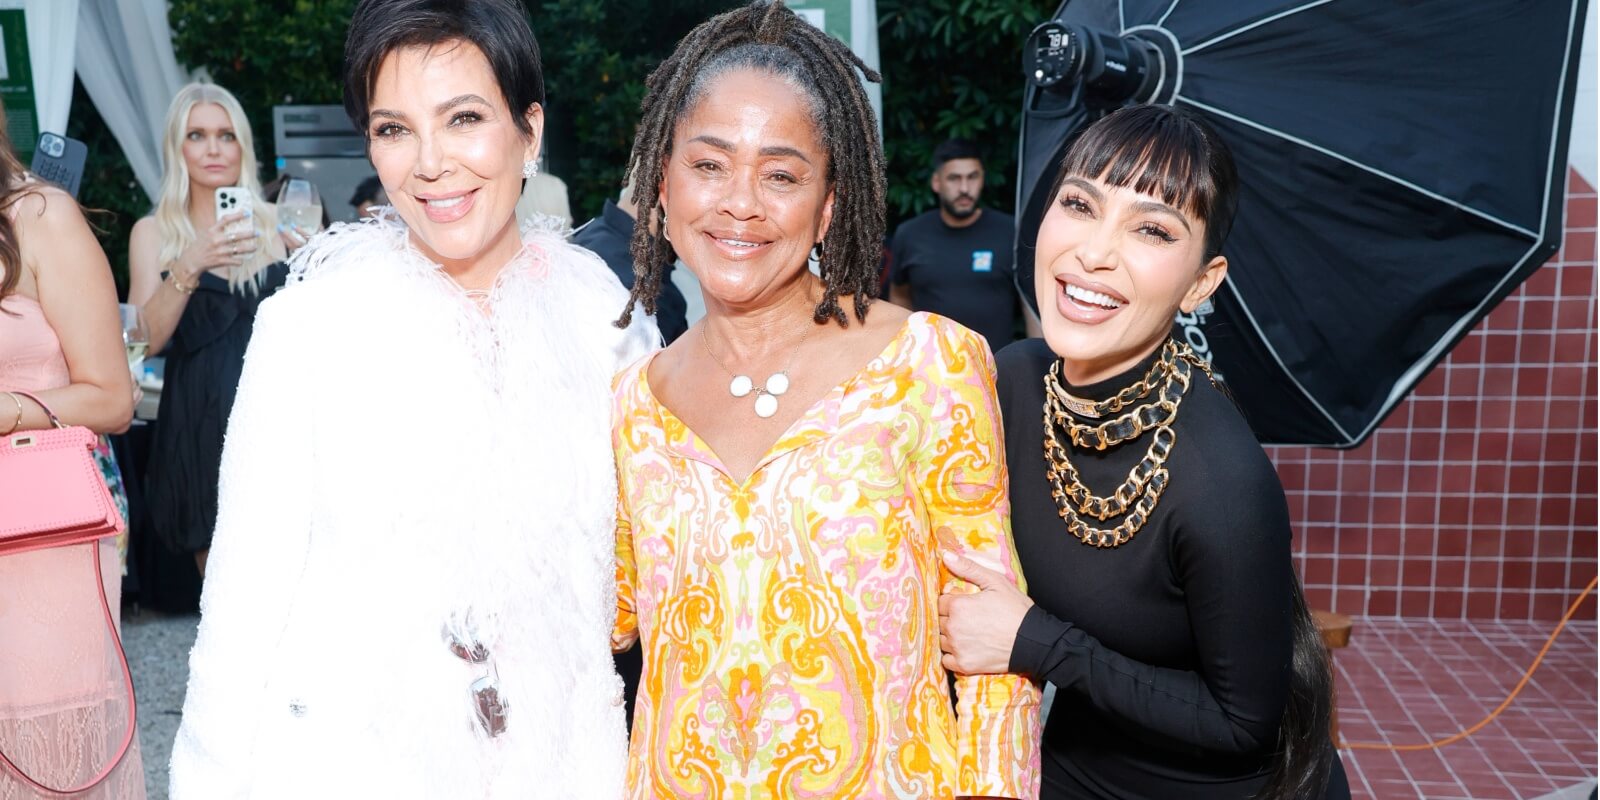 Kris Jenner, Doria Ragland, and Kim Kardashian at a charity event in August 2023.